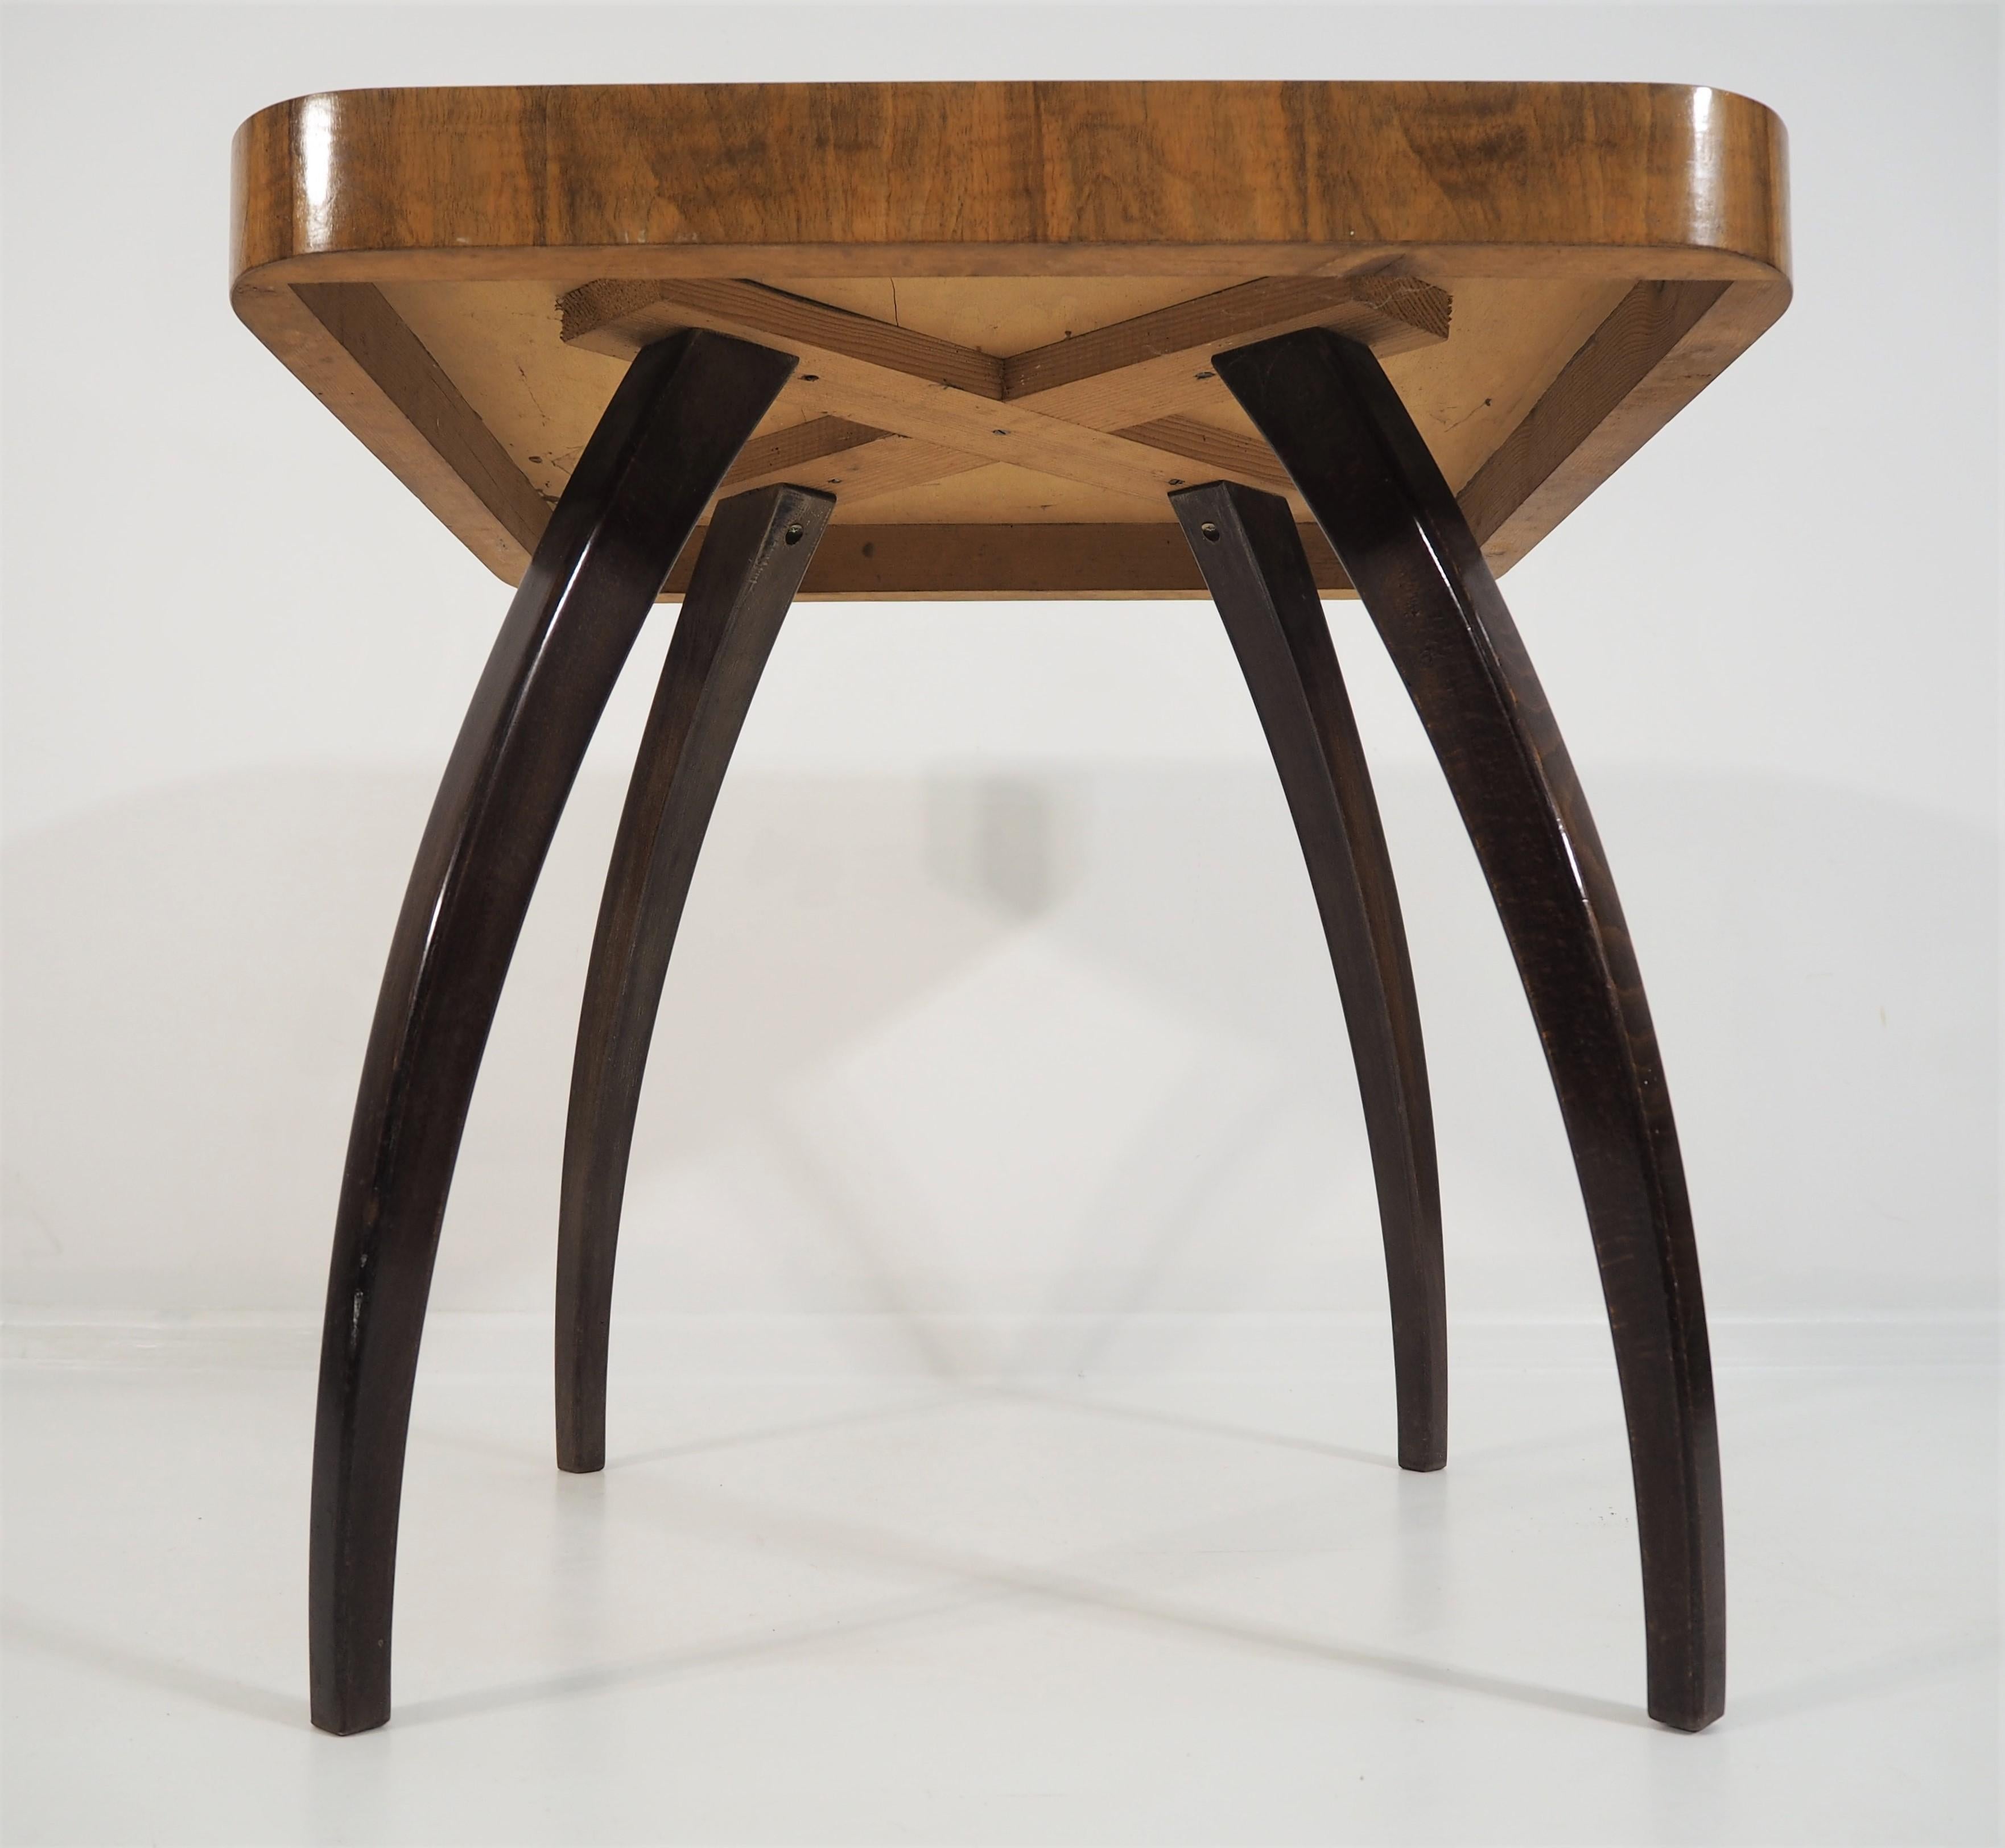 Art Deco walnut side table. This adjustable dining table was designed and made in the circa 1955 in the former Czechoslovakia. It was designed by Jindrich Halabala for ÚP Závody. The material is a combination of solid wood and walnut veneer.